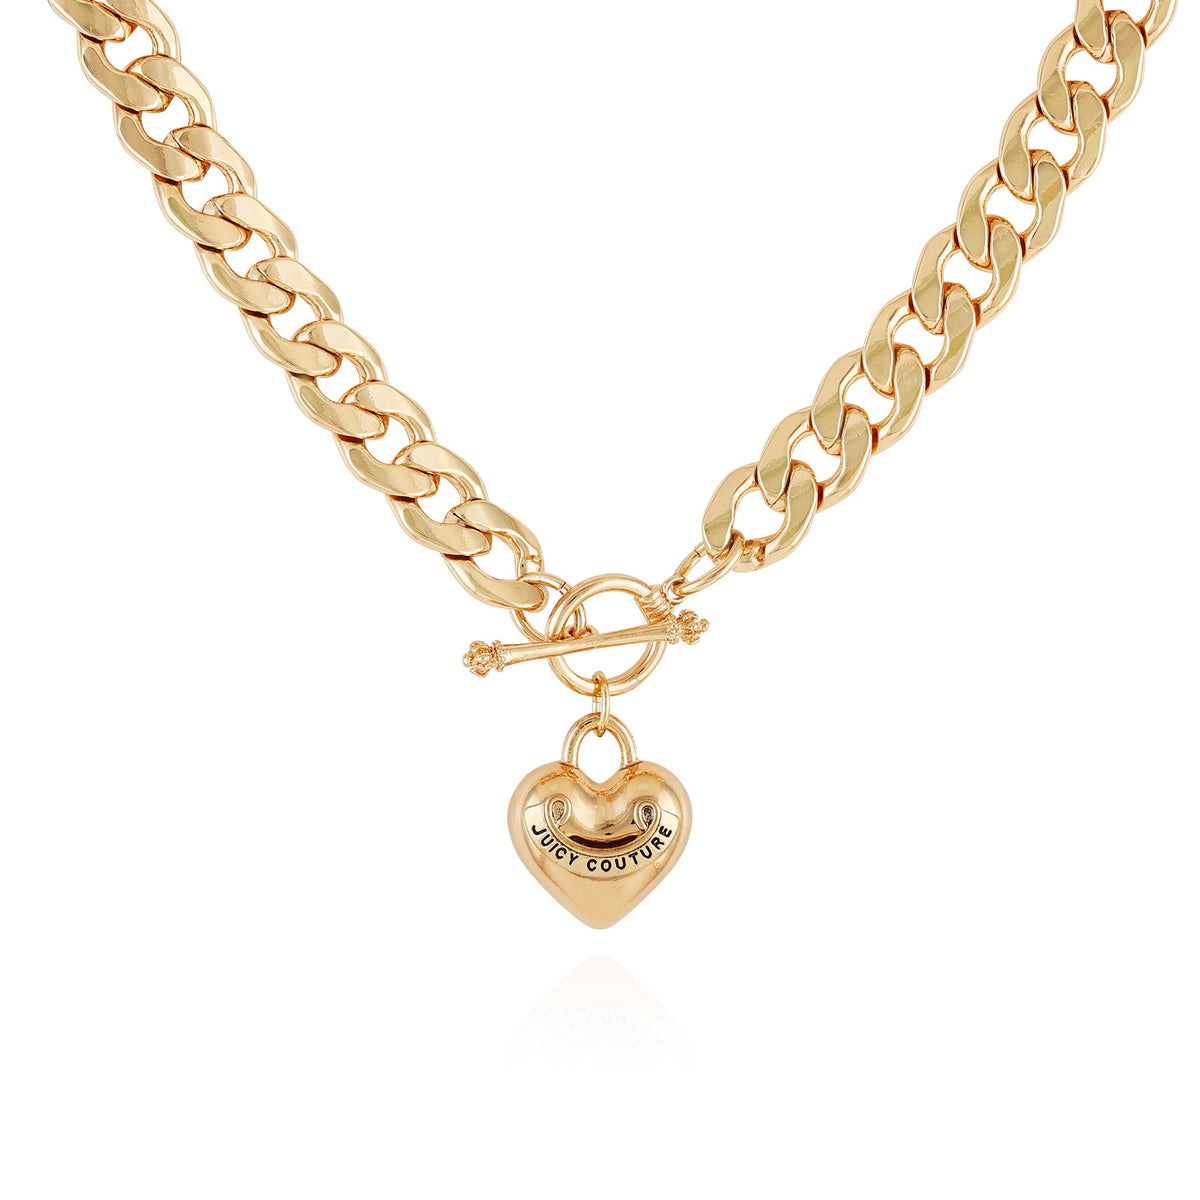 Juicy Couture Heart Pendant Necklace Gold